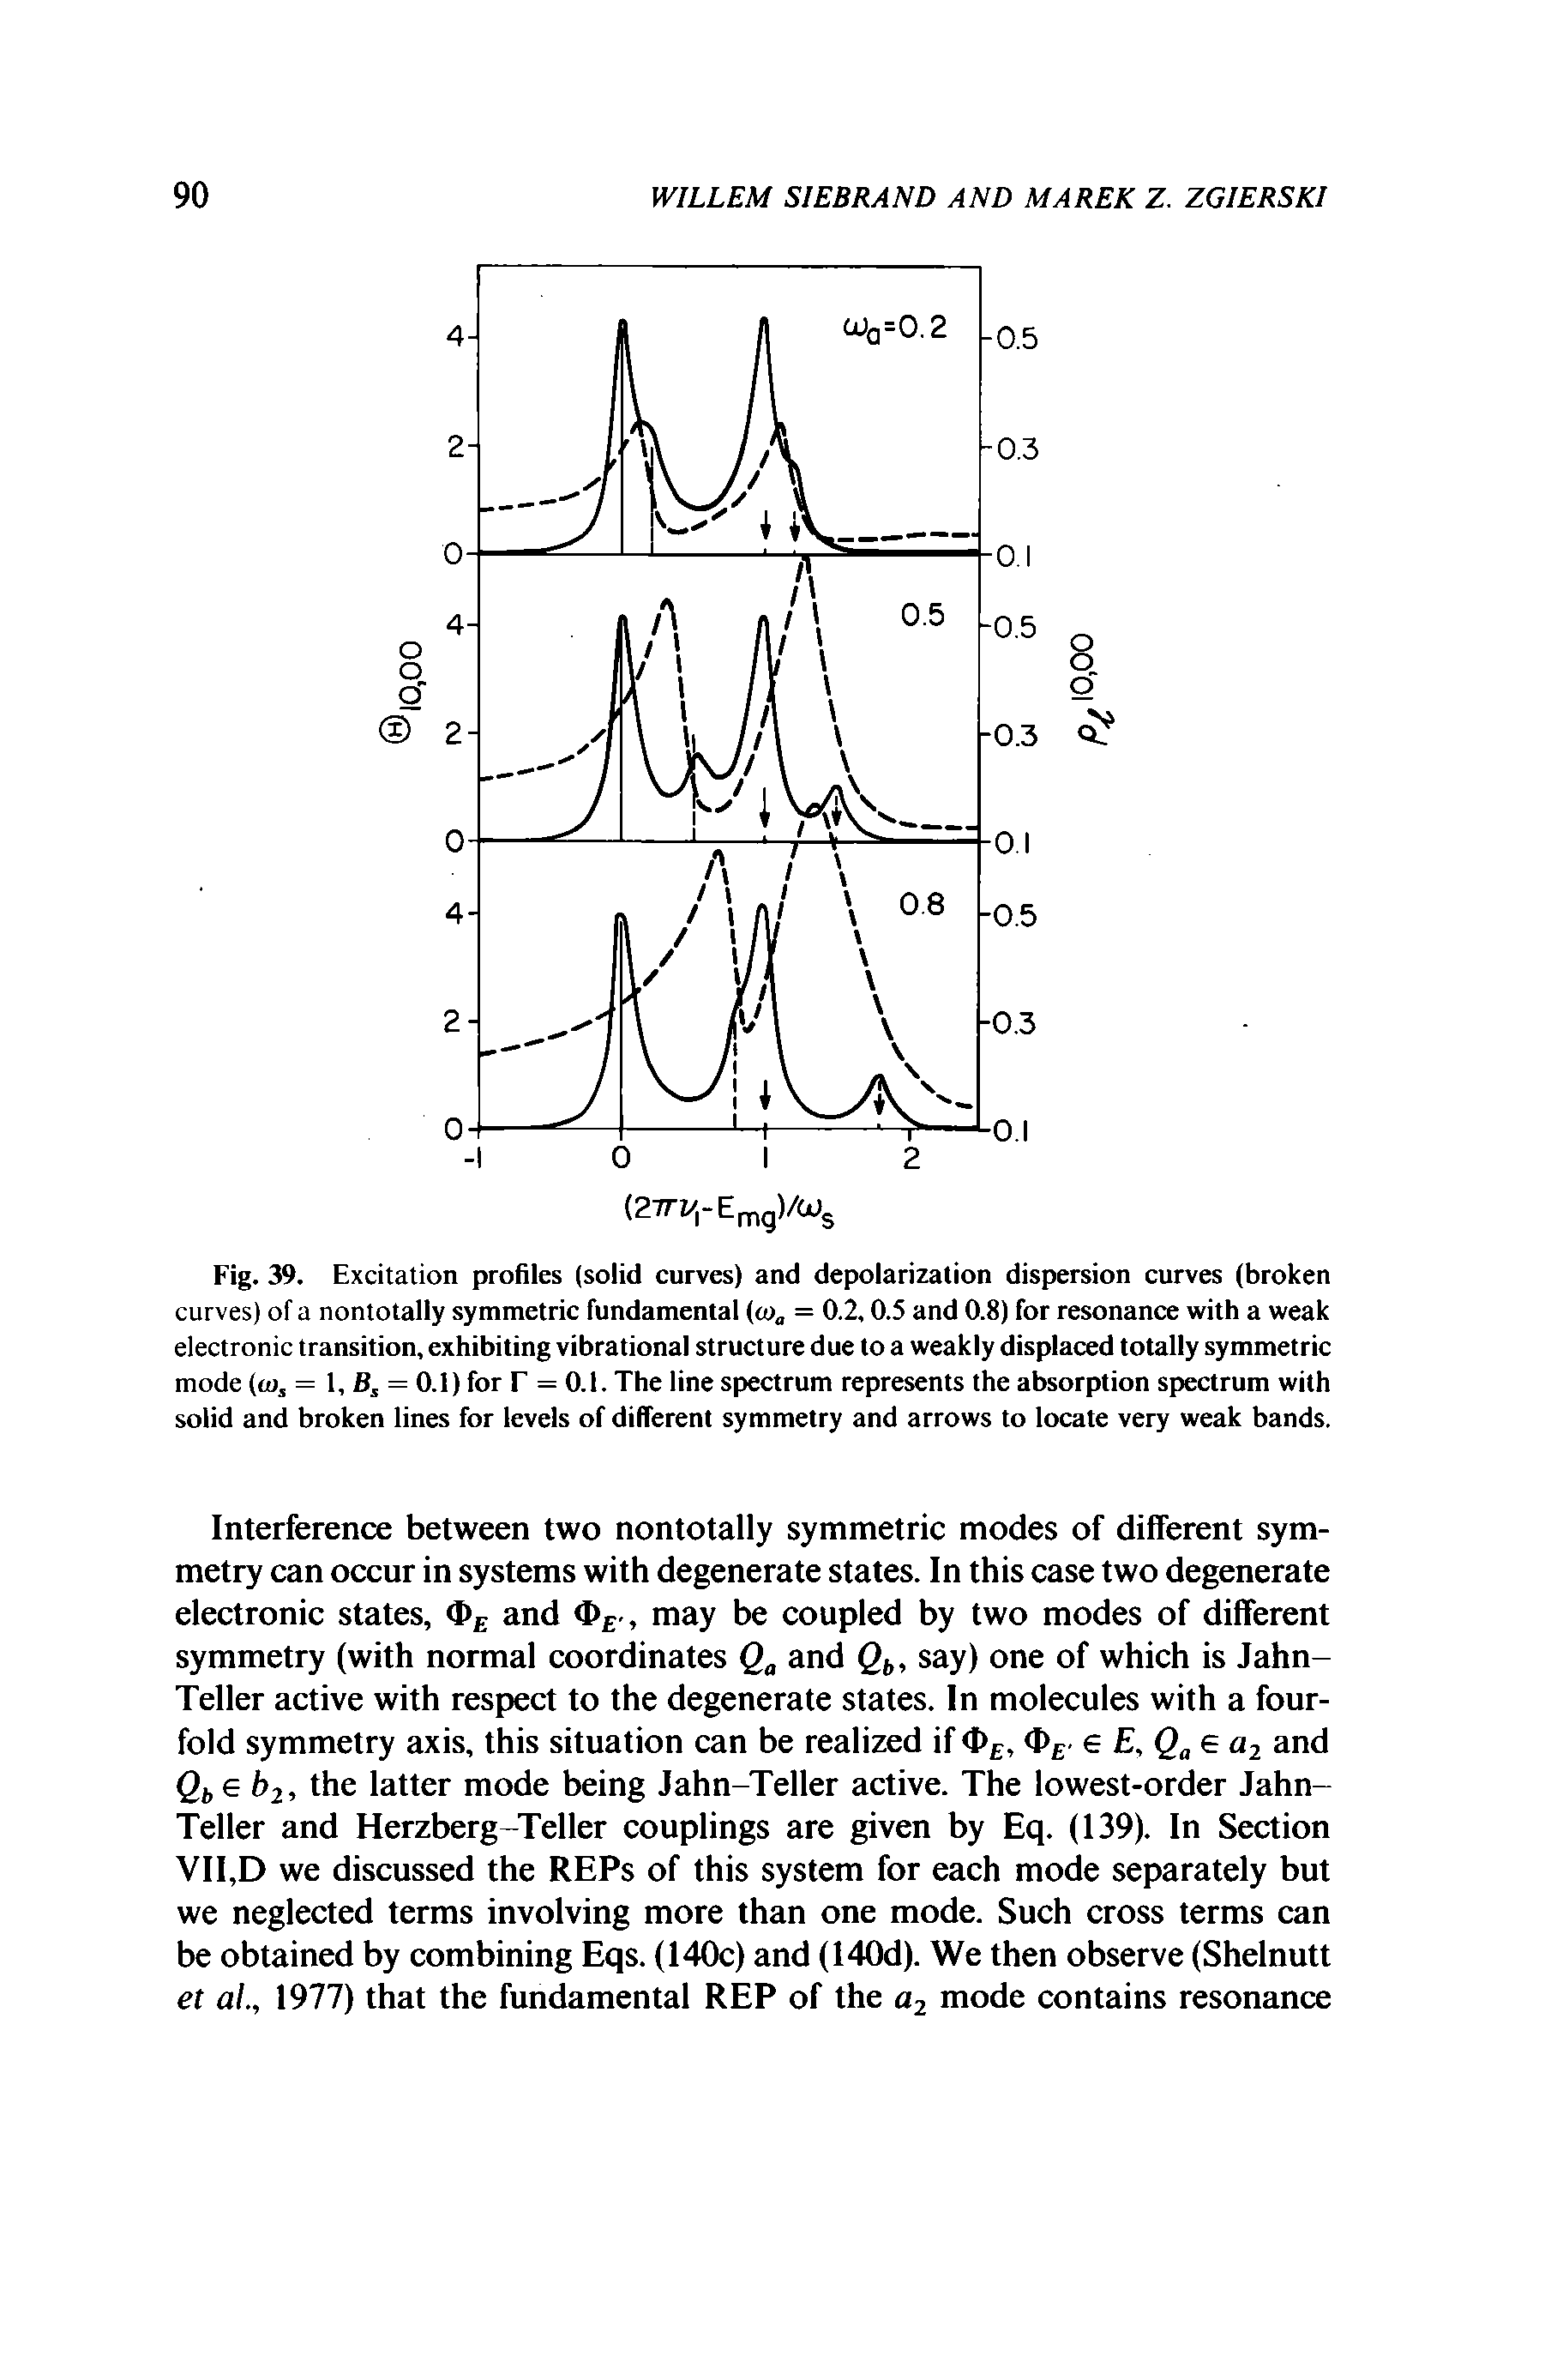 Fig. 39. Excitation profiles (solid curves) and depolarization dispersion curves (broken curves) of a nontotally symmetric fundamental (<o, = O.Z 0.5 and 0.8) for resonance with a weak electronic transition, exhibiting vibrational structure due to a weakly displaced totally symmetric mode (to, = 1, B, = 0.1) for F = 0.1. The line spectrum represents the absorption spectrum with solid and broken lines for levels of diflerent symmetry and arrows to locate very weak bands.